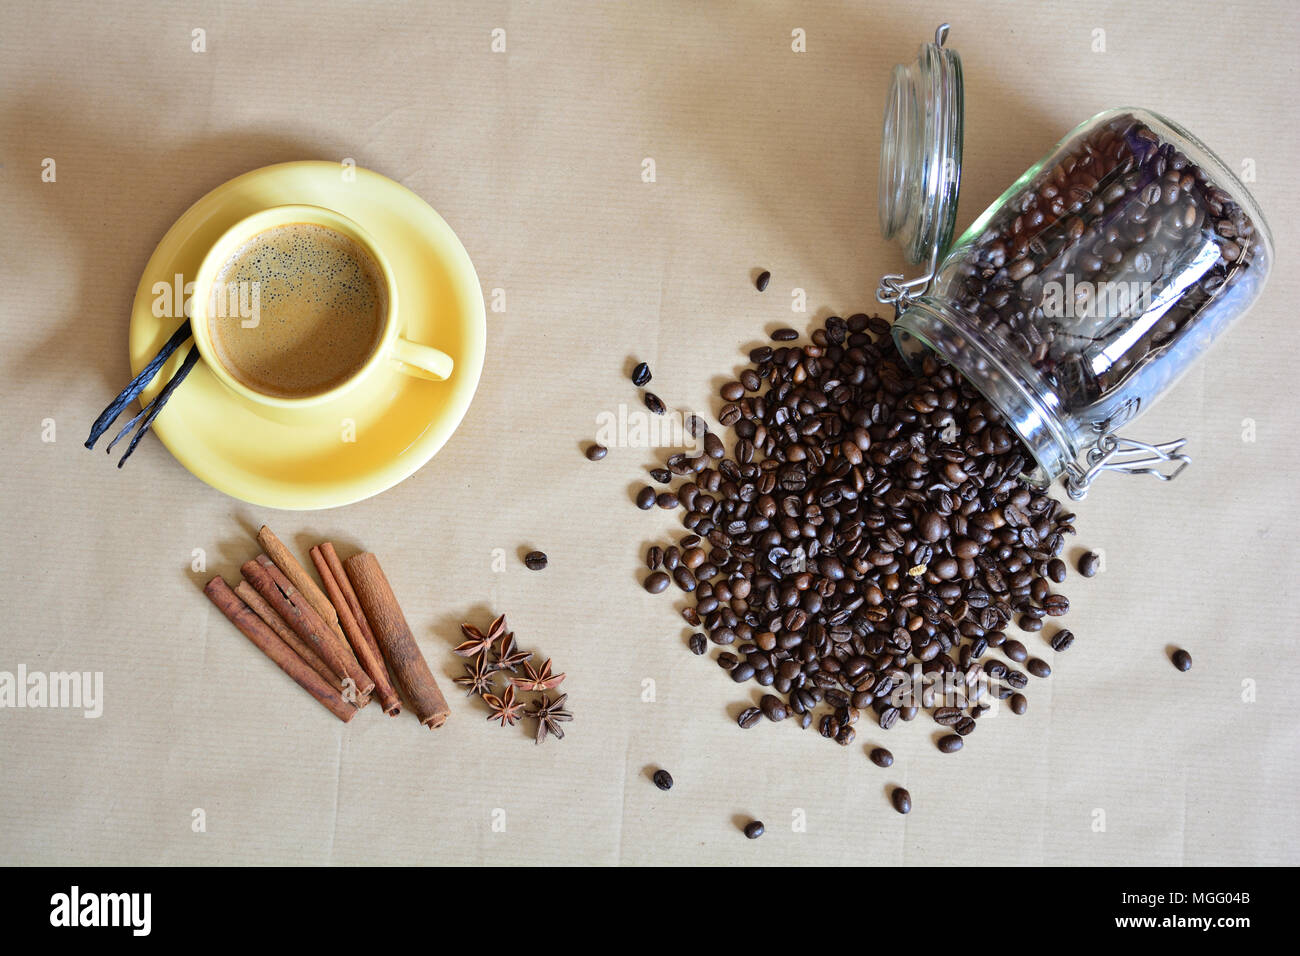 Spilled coffee beans with a cup of coffee and anise, vanilla, cinnamon sticks Stock Photo